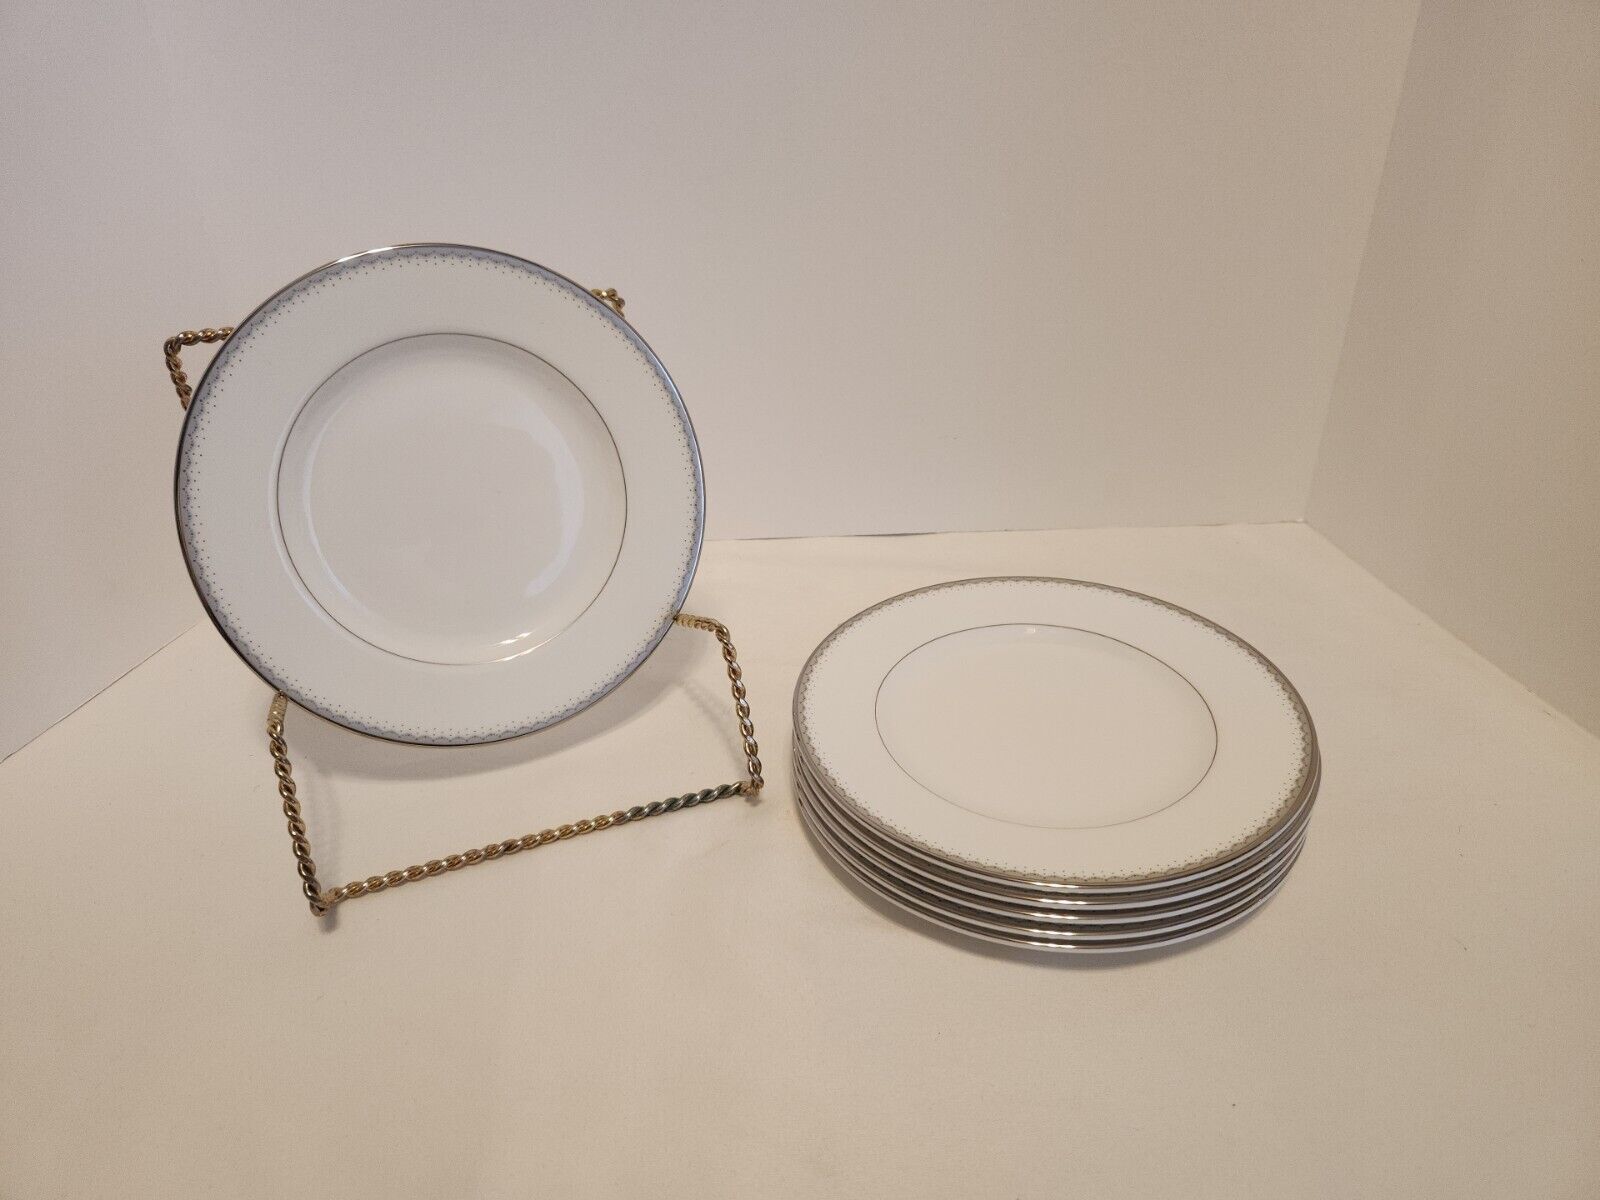 Waterford Dentelle China Monique Lhuillier Set Of 6 Bread & Butter Plate 6.5\